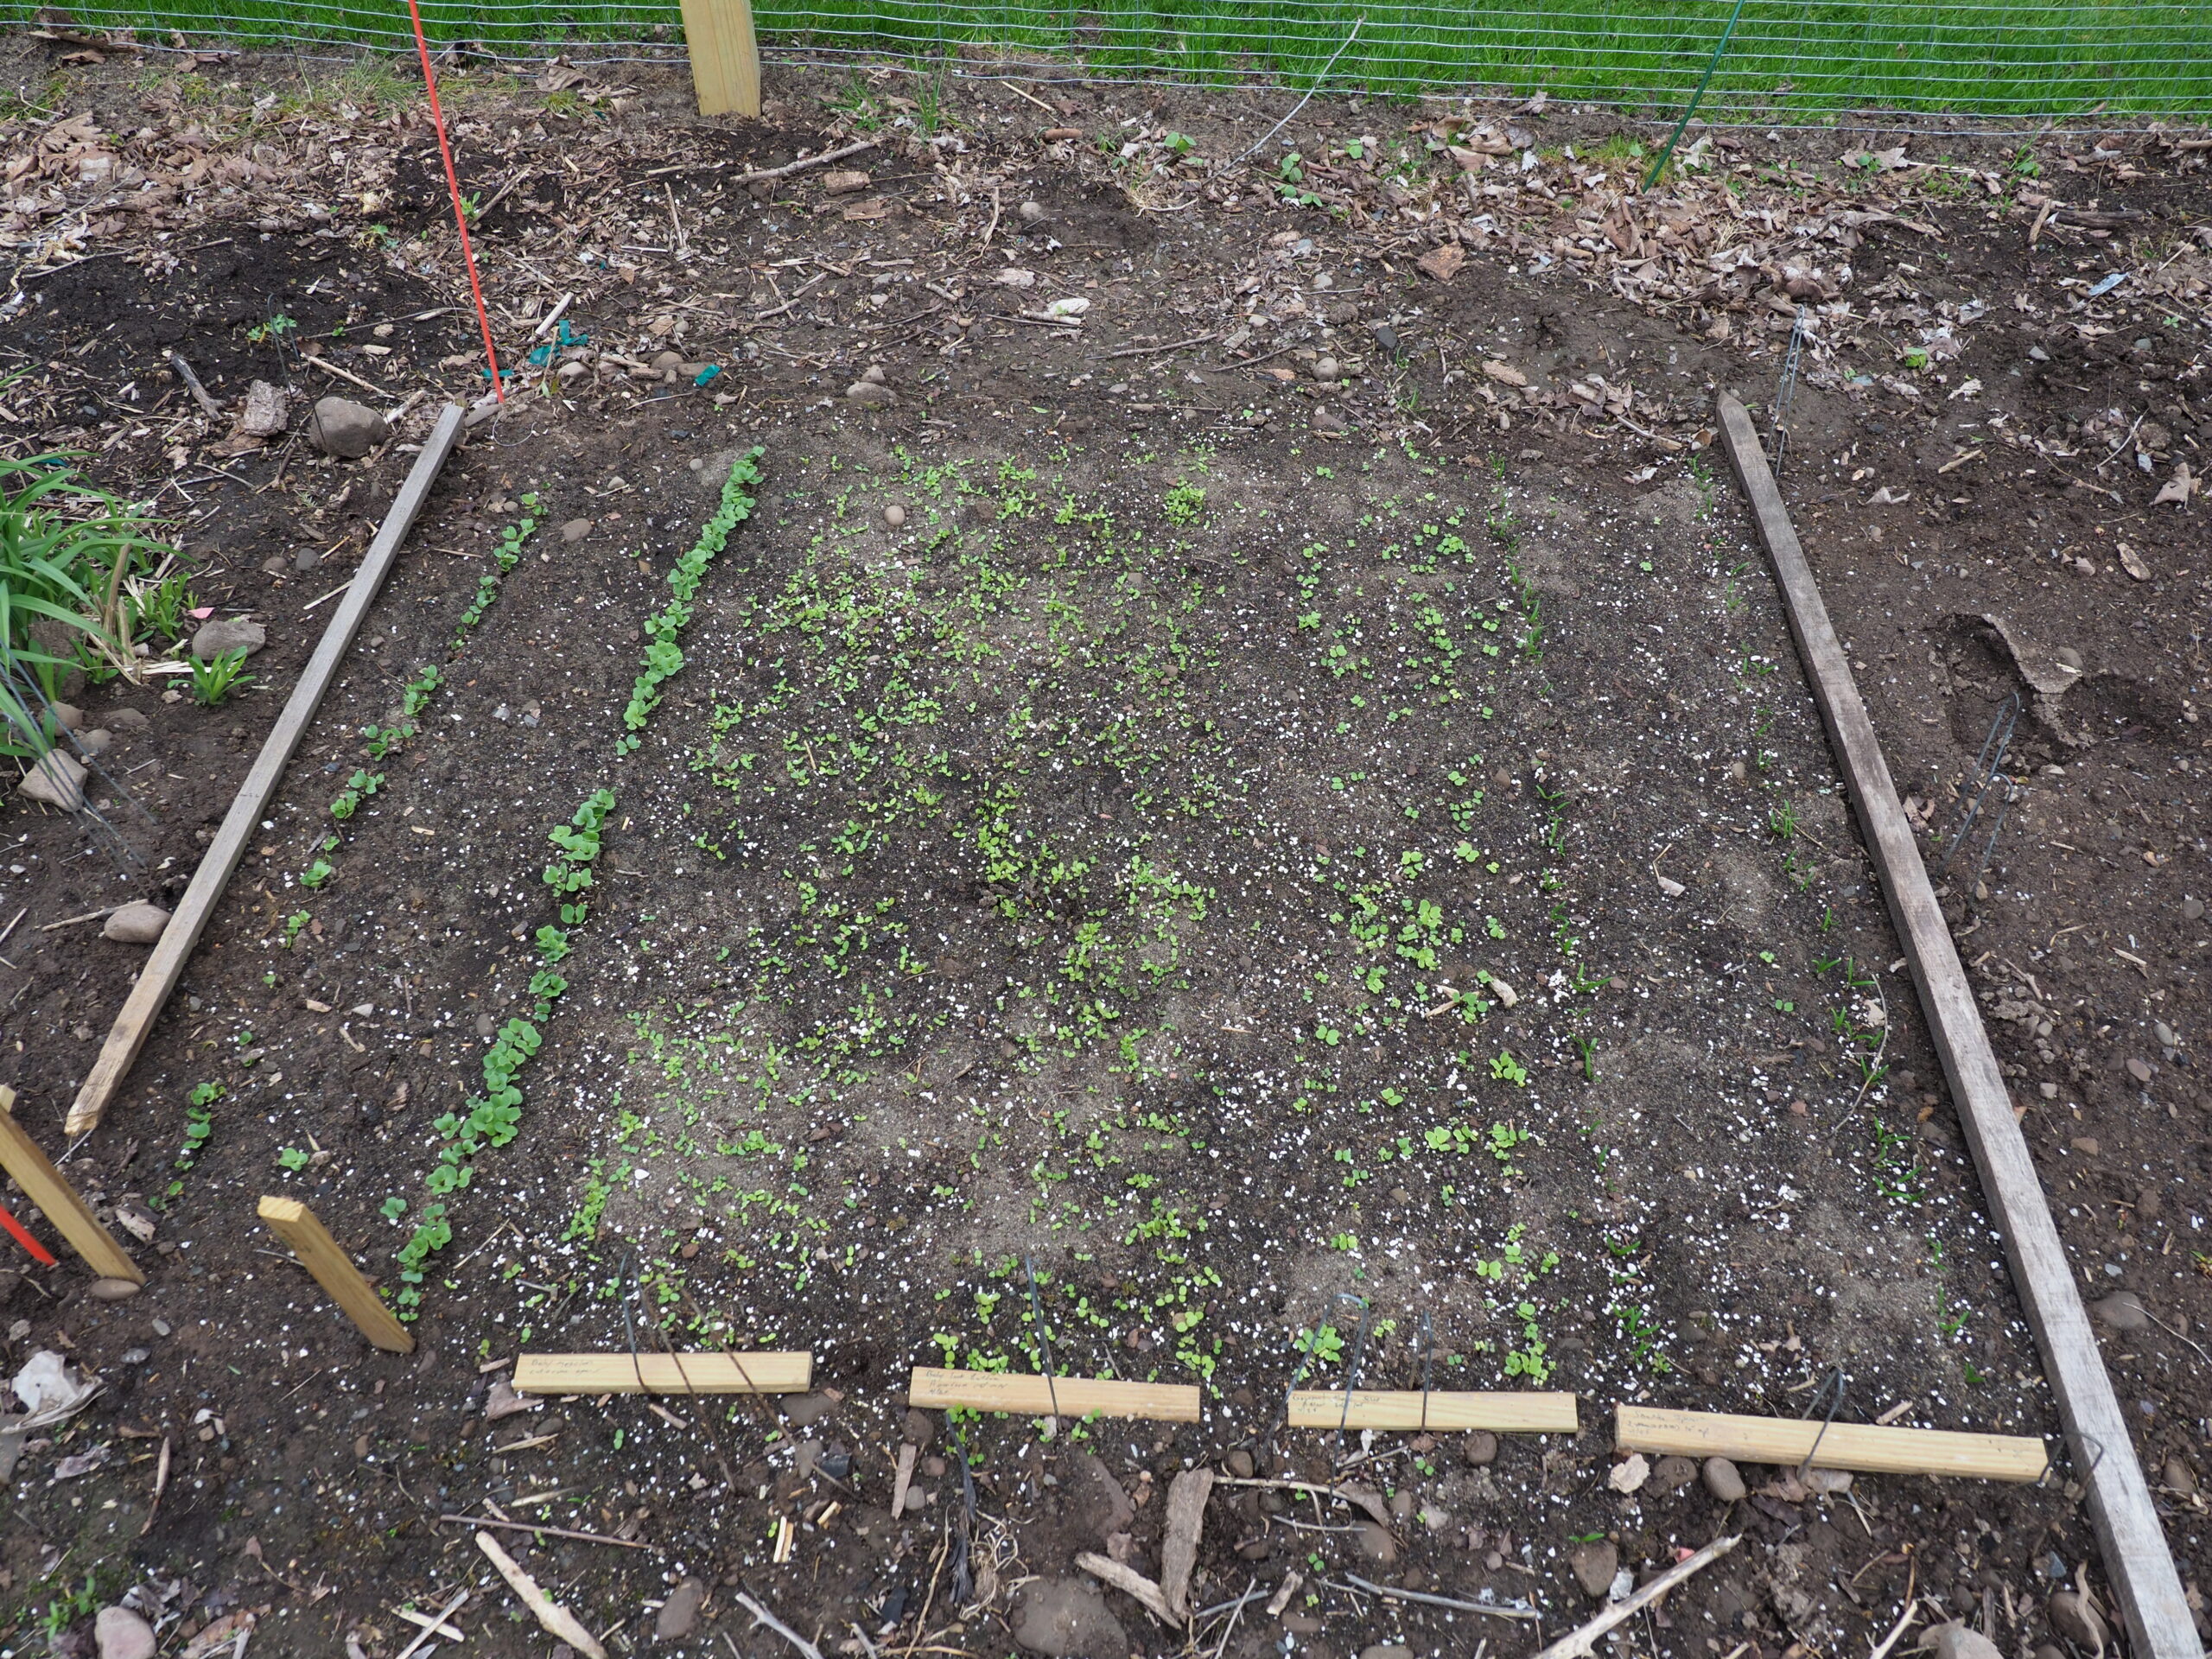 The Hampton Gardener’s humble veggie patch.  Two types of radish (left), three cutting types of lettuces (center) and two rows of cutting spinach (right). As this block grows in a second, similar block was just seeded and a third will follow with some variation.  Seeding resumes again in mid-August, and the three plots will continue to produce through late October.  Wooden labels indicate variety, sowing date and harvest dates. The thinned radish seedlings went right into a very tasty, but zingy, salad.   ANDREW MESSINGER